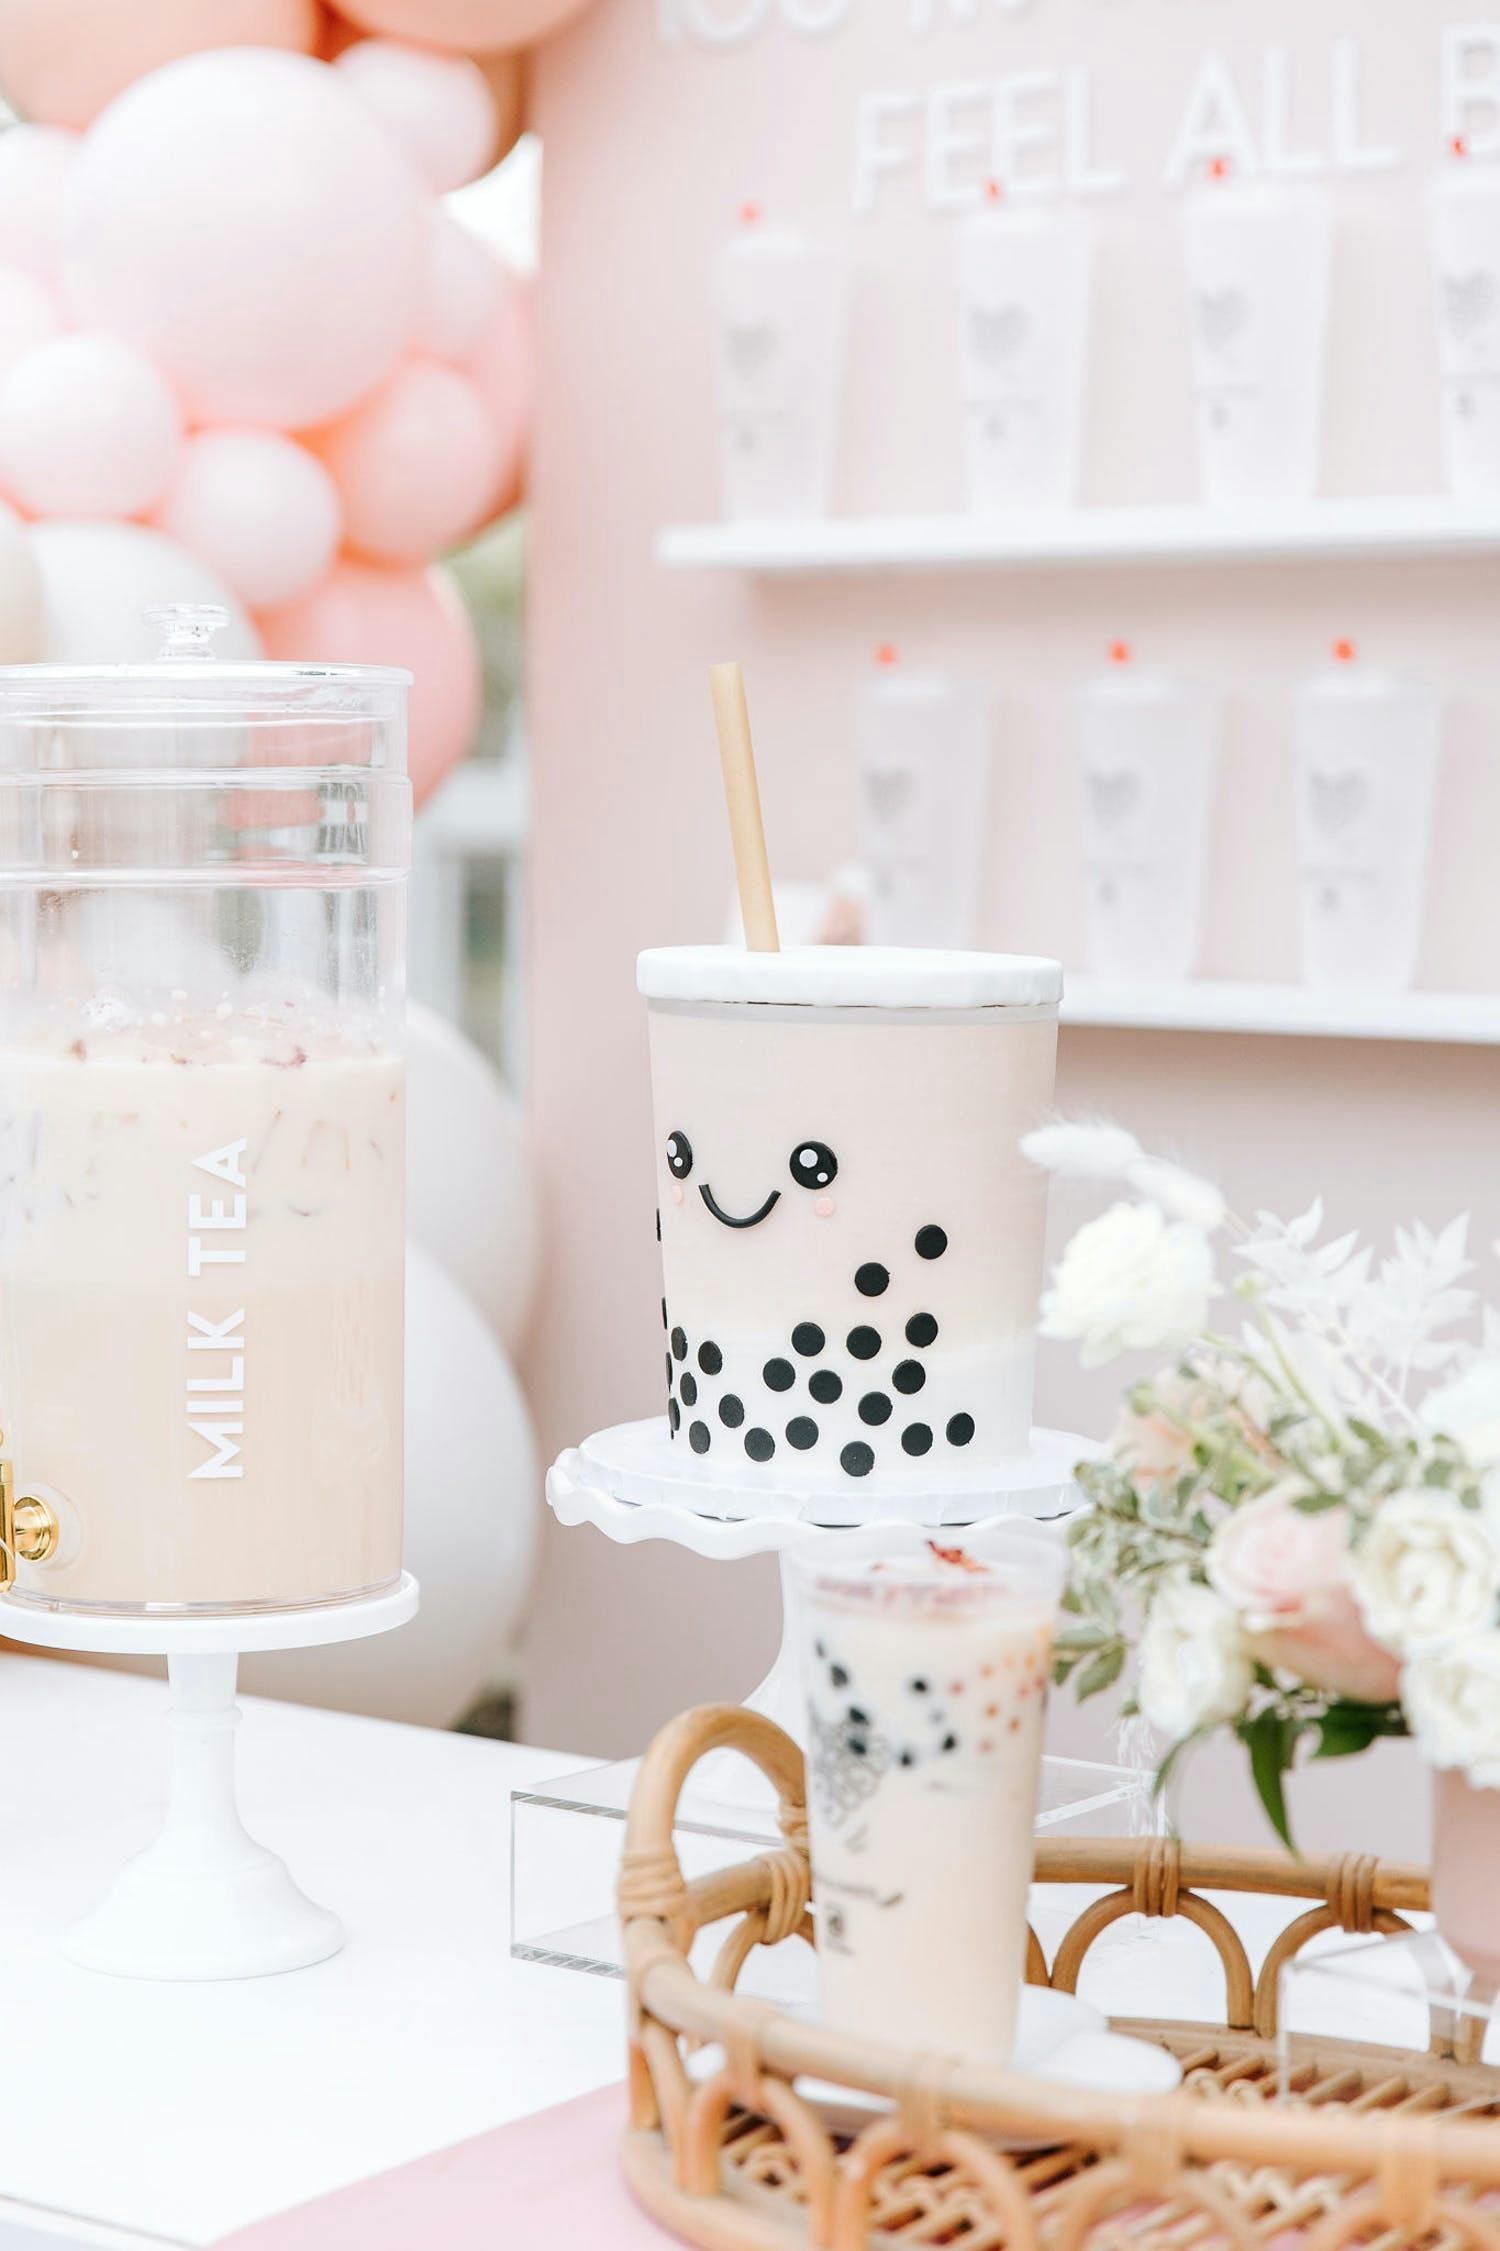 Boba Tea Themed Celebration With Pastel Pink and White Décor and Smily Faced Boba Tea Desserts | PartySlate